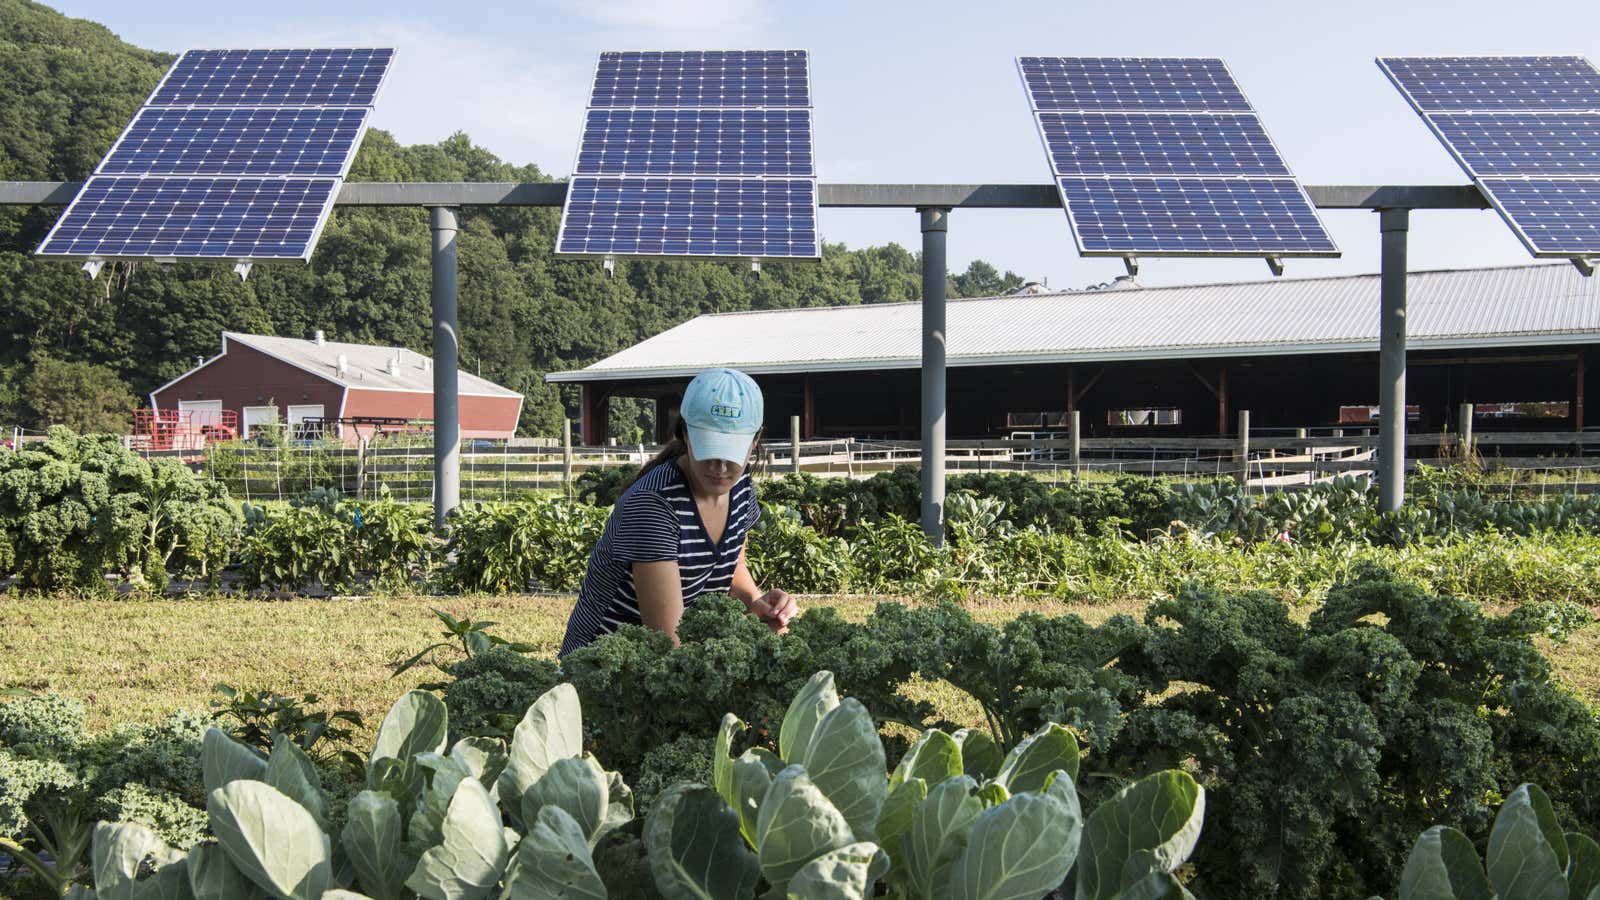 Solar panels situated on farms—known as “agrivoltaics”—are emerging as a way for states to preserve farmland while meeting their clean energy goals.